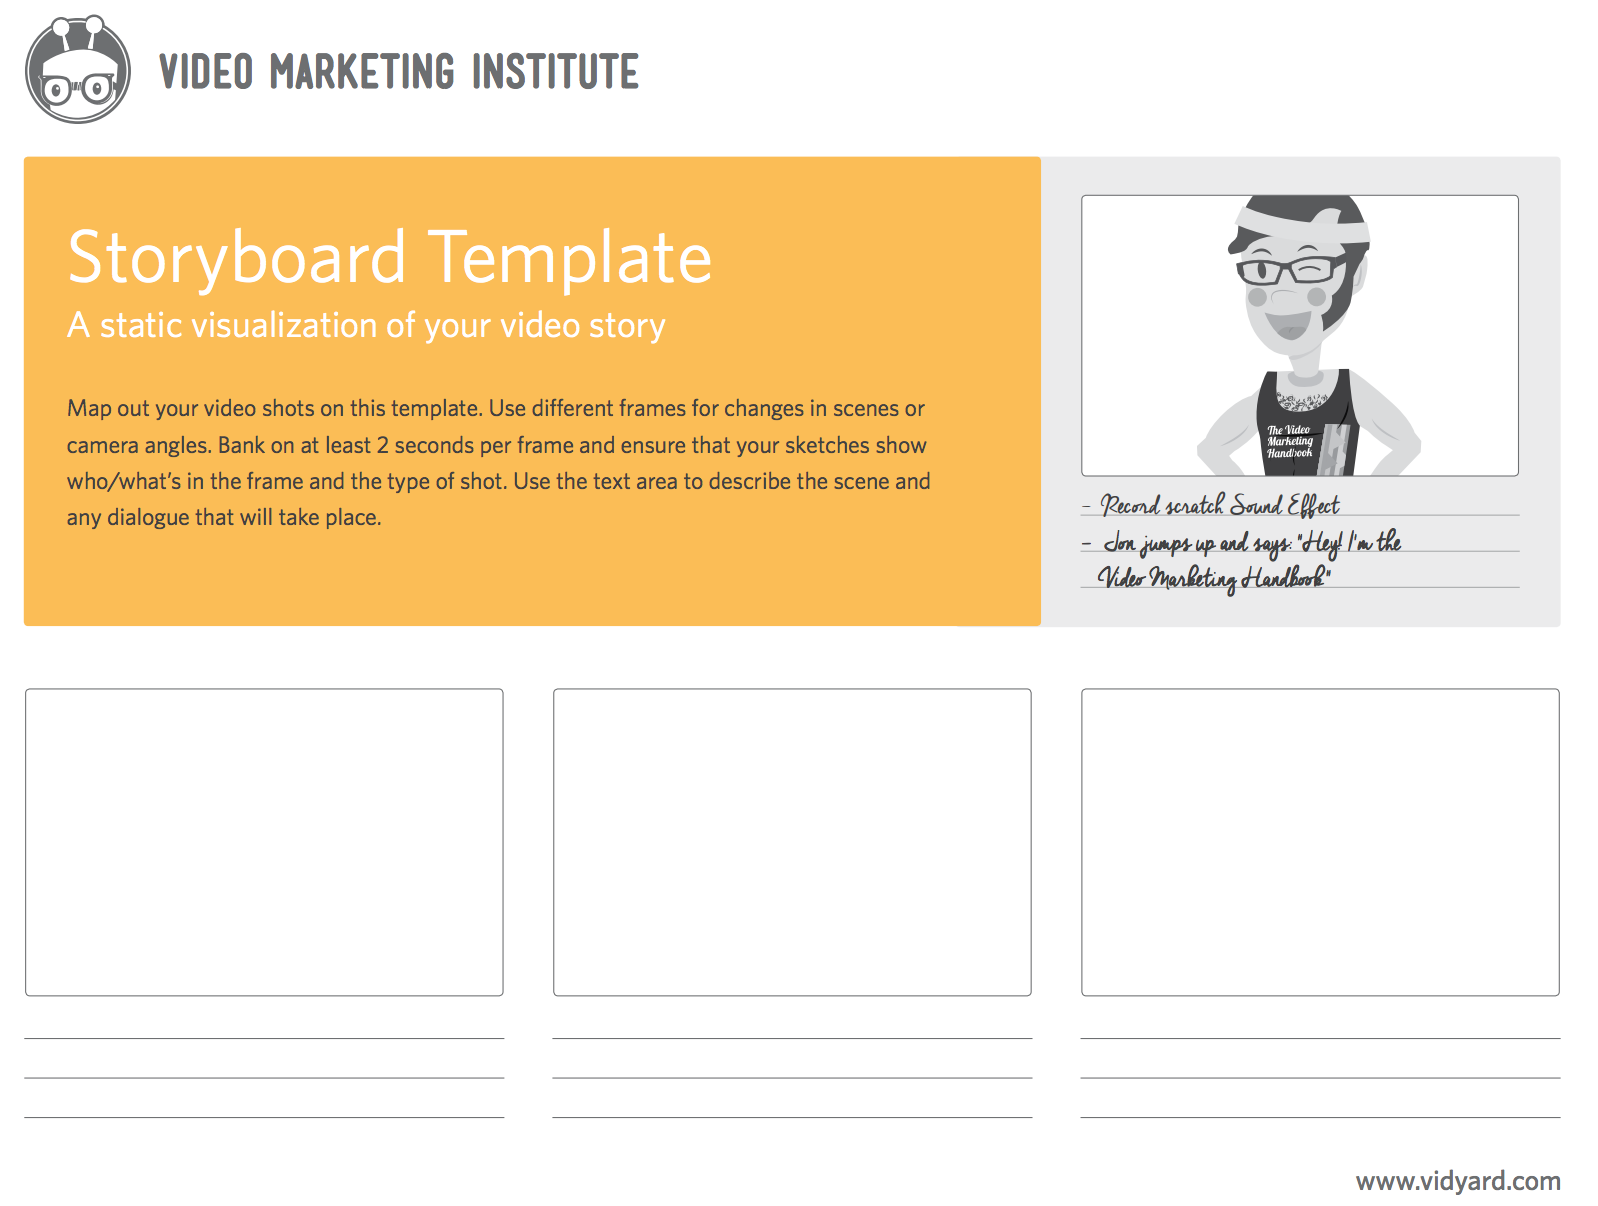 Pages guide. Storyboard Template. Сториборд для сайта. Storyboard Template 20 frames. Vidyard отзывы.